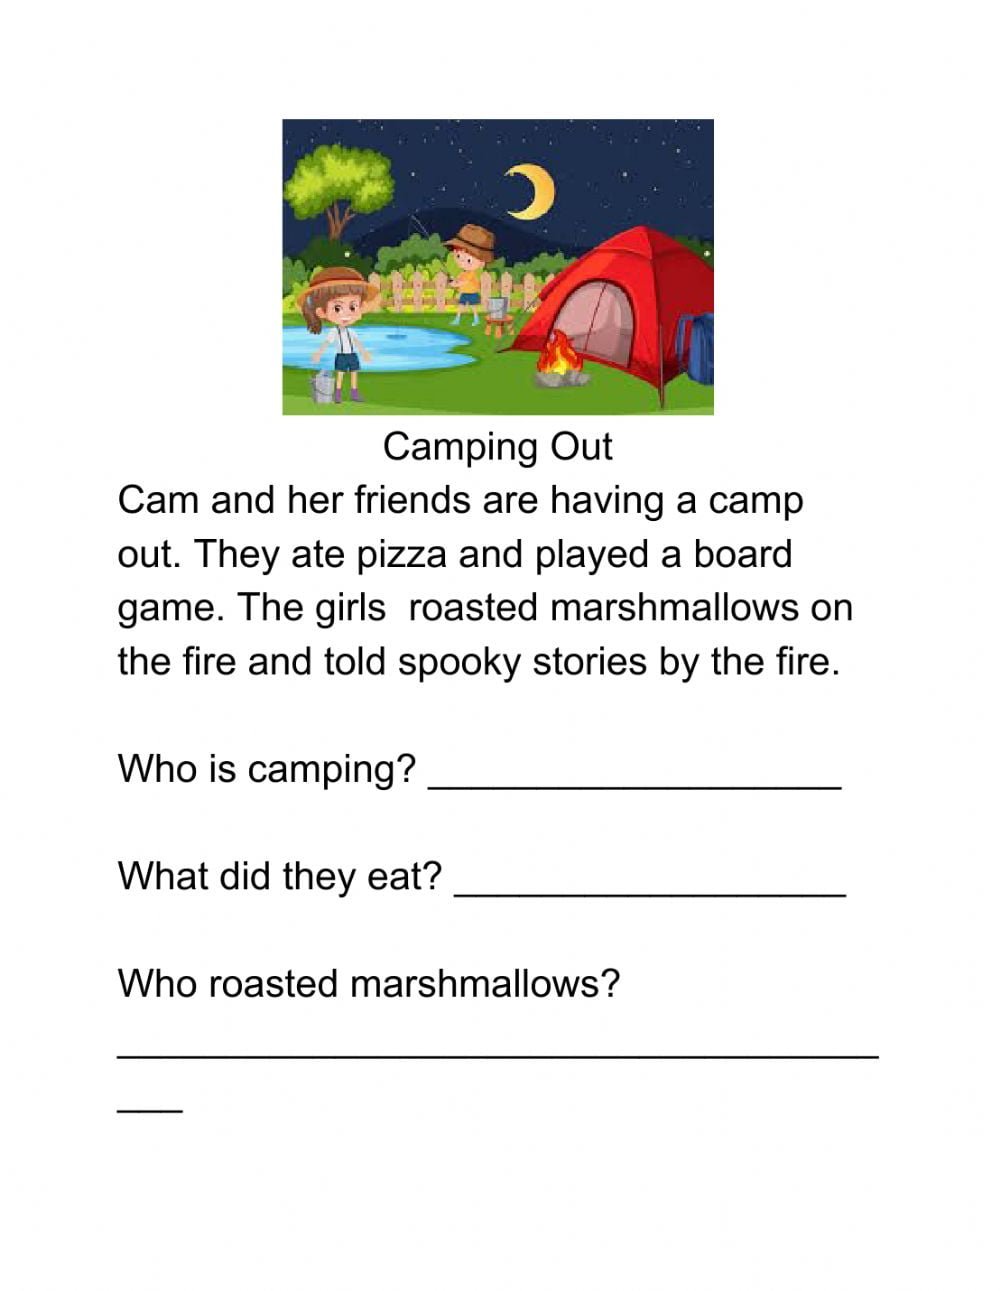 camp-out-reading-comprehension-worksheets-worksheetscity